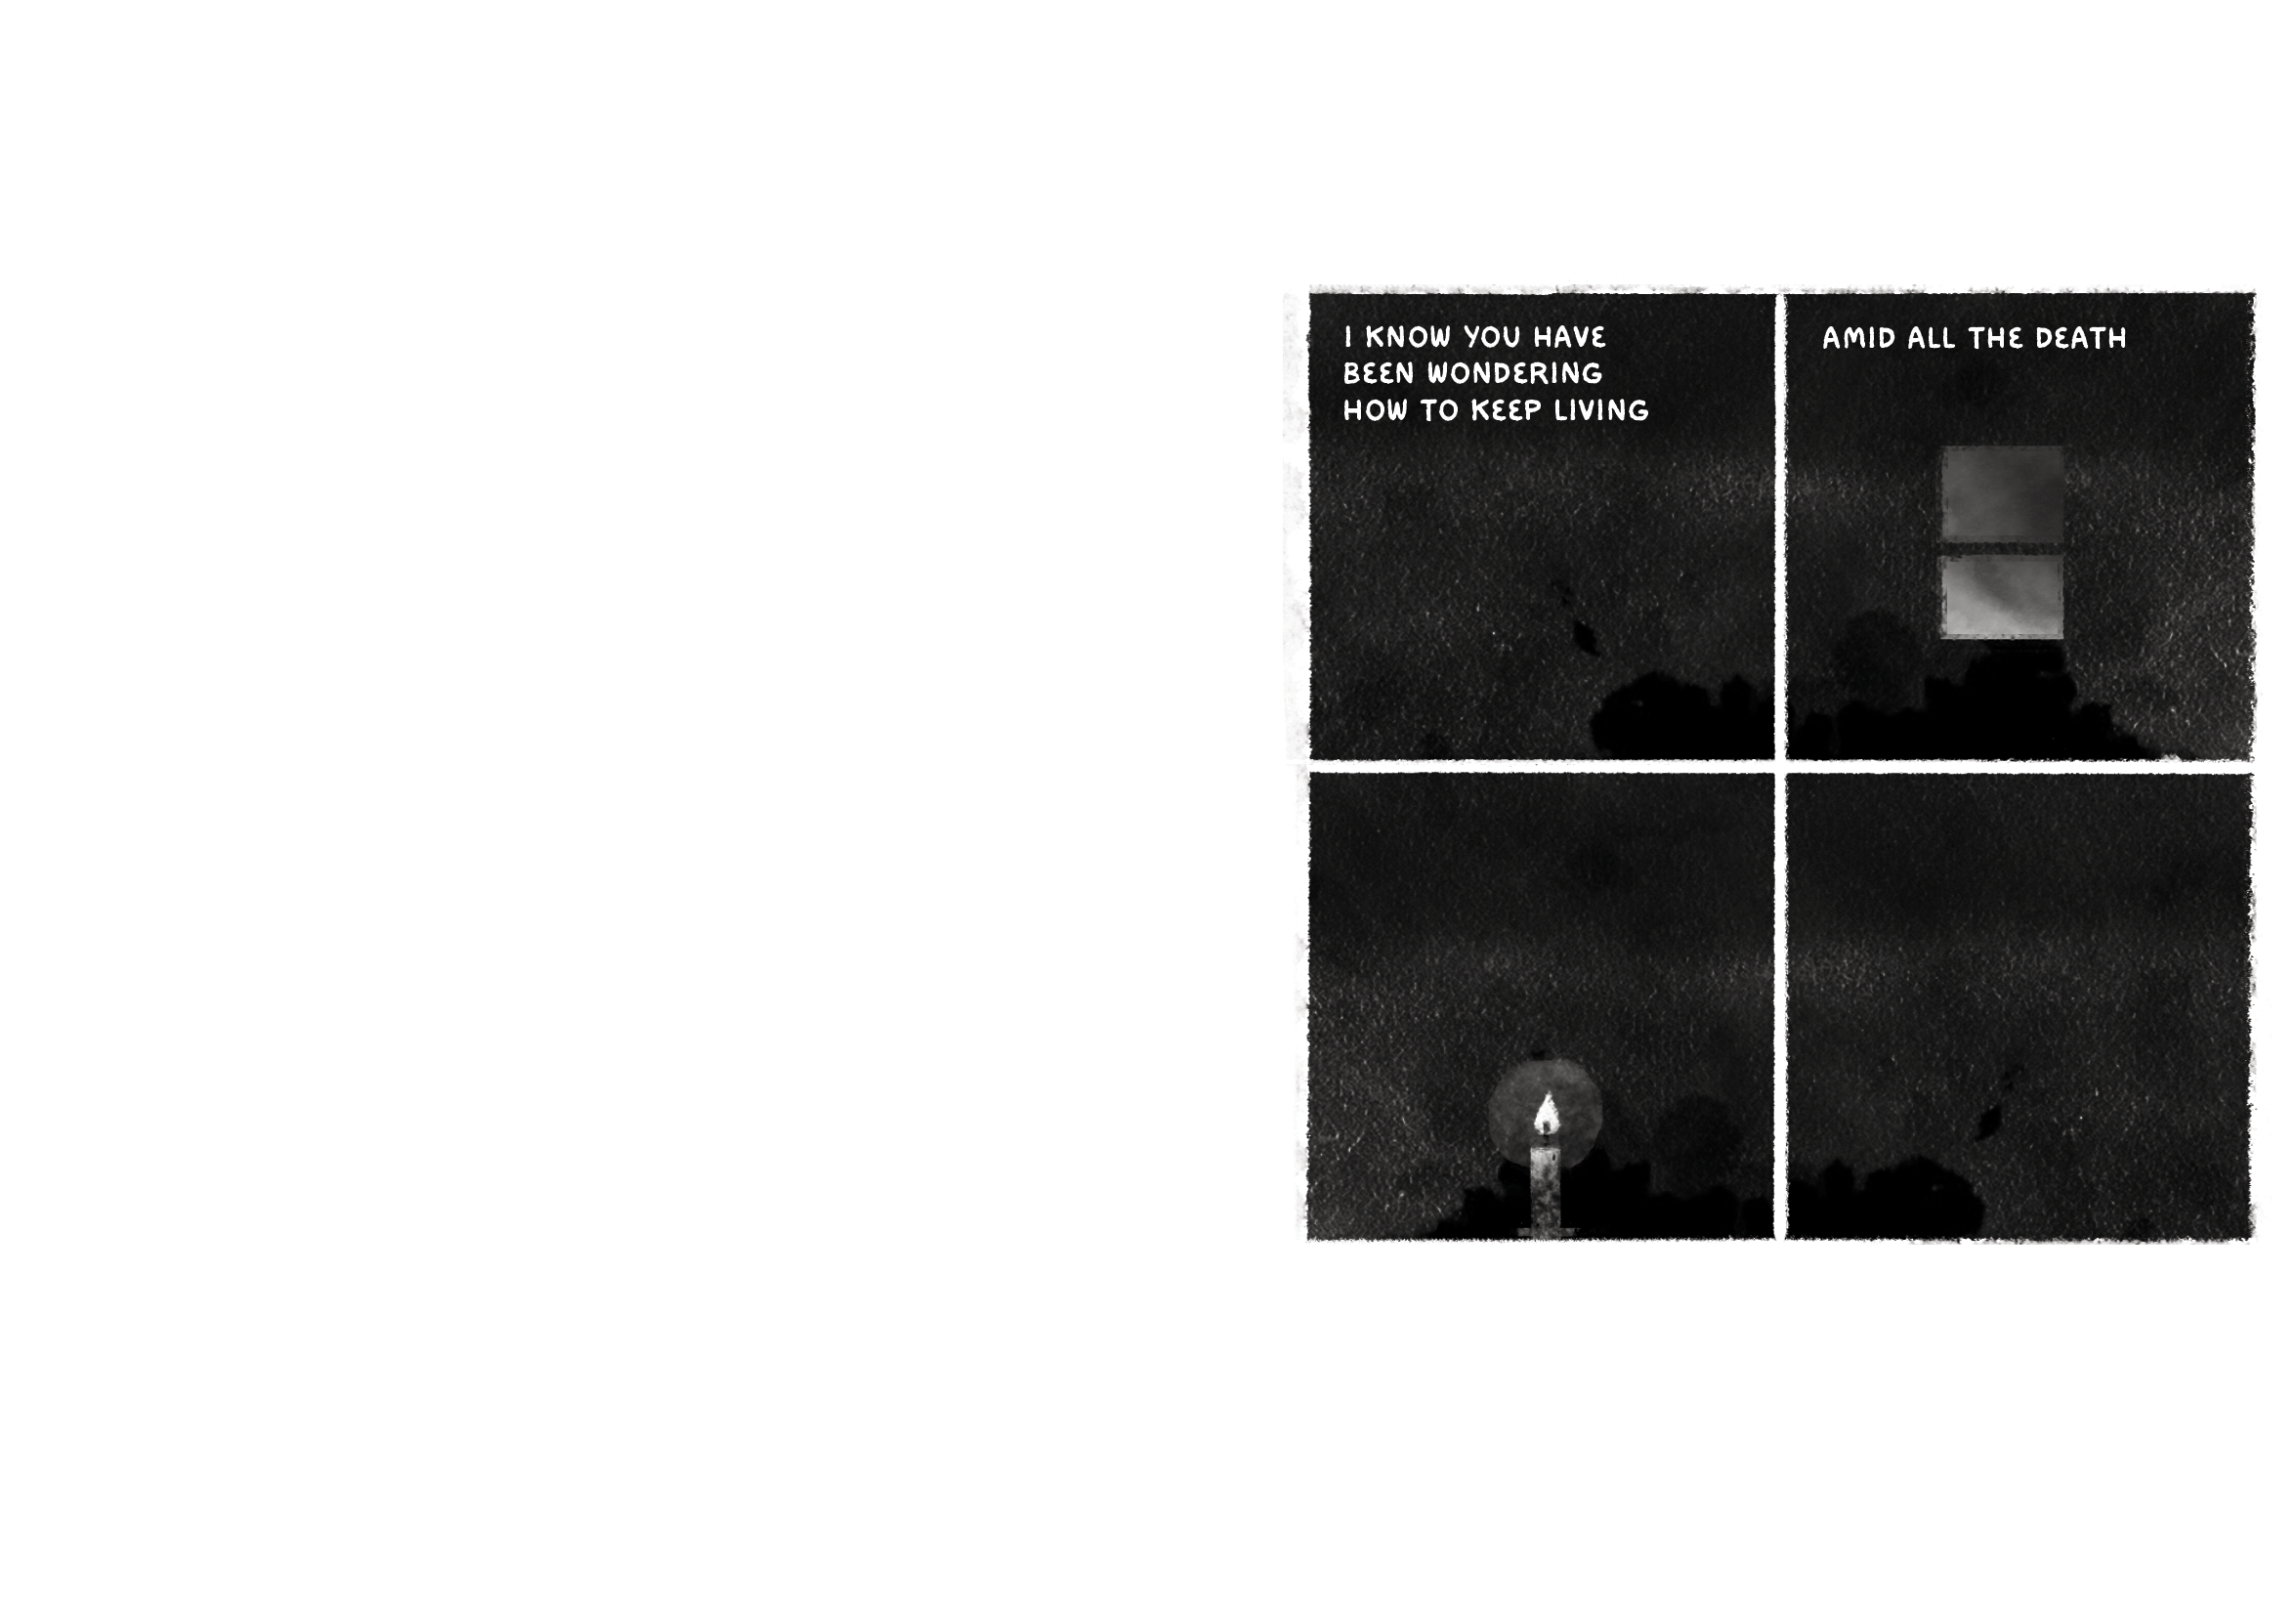 Four-panel comic. Text: I know you have been wondering how to keep living amid all the death. Images: A totally dark room. A dimly-lit window, seen from within. A single candle in a large space.